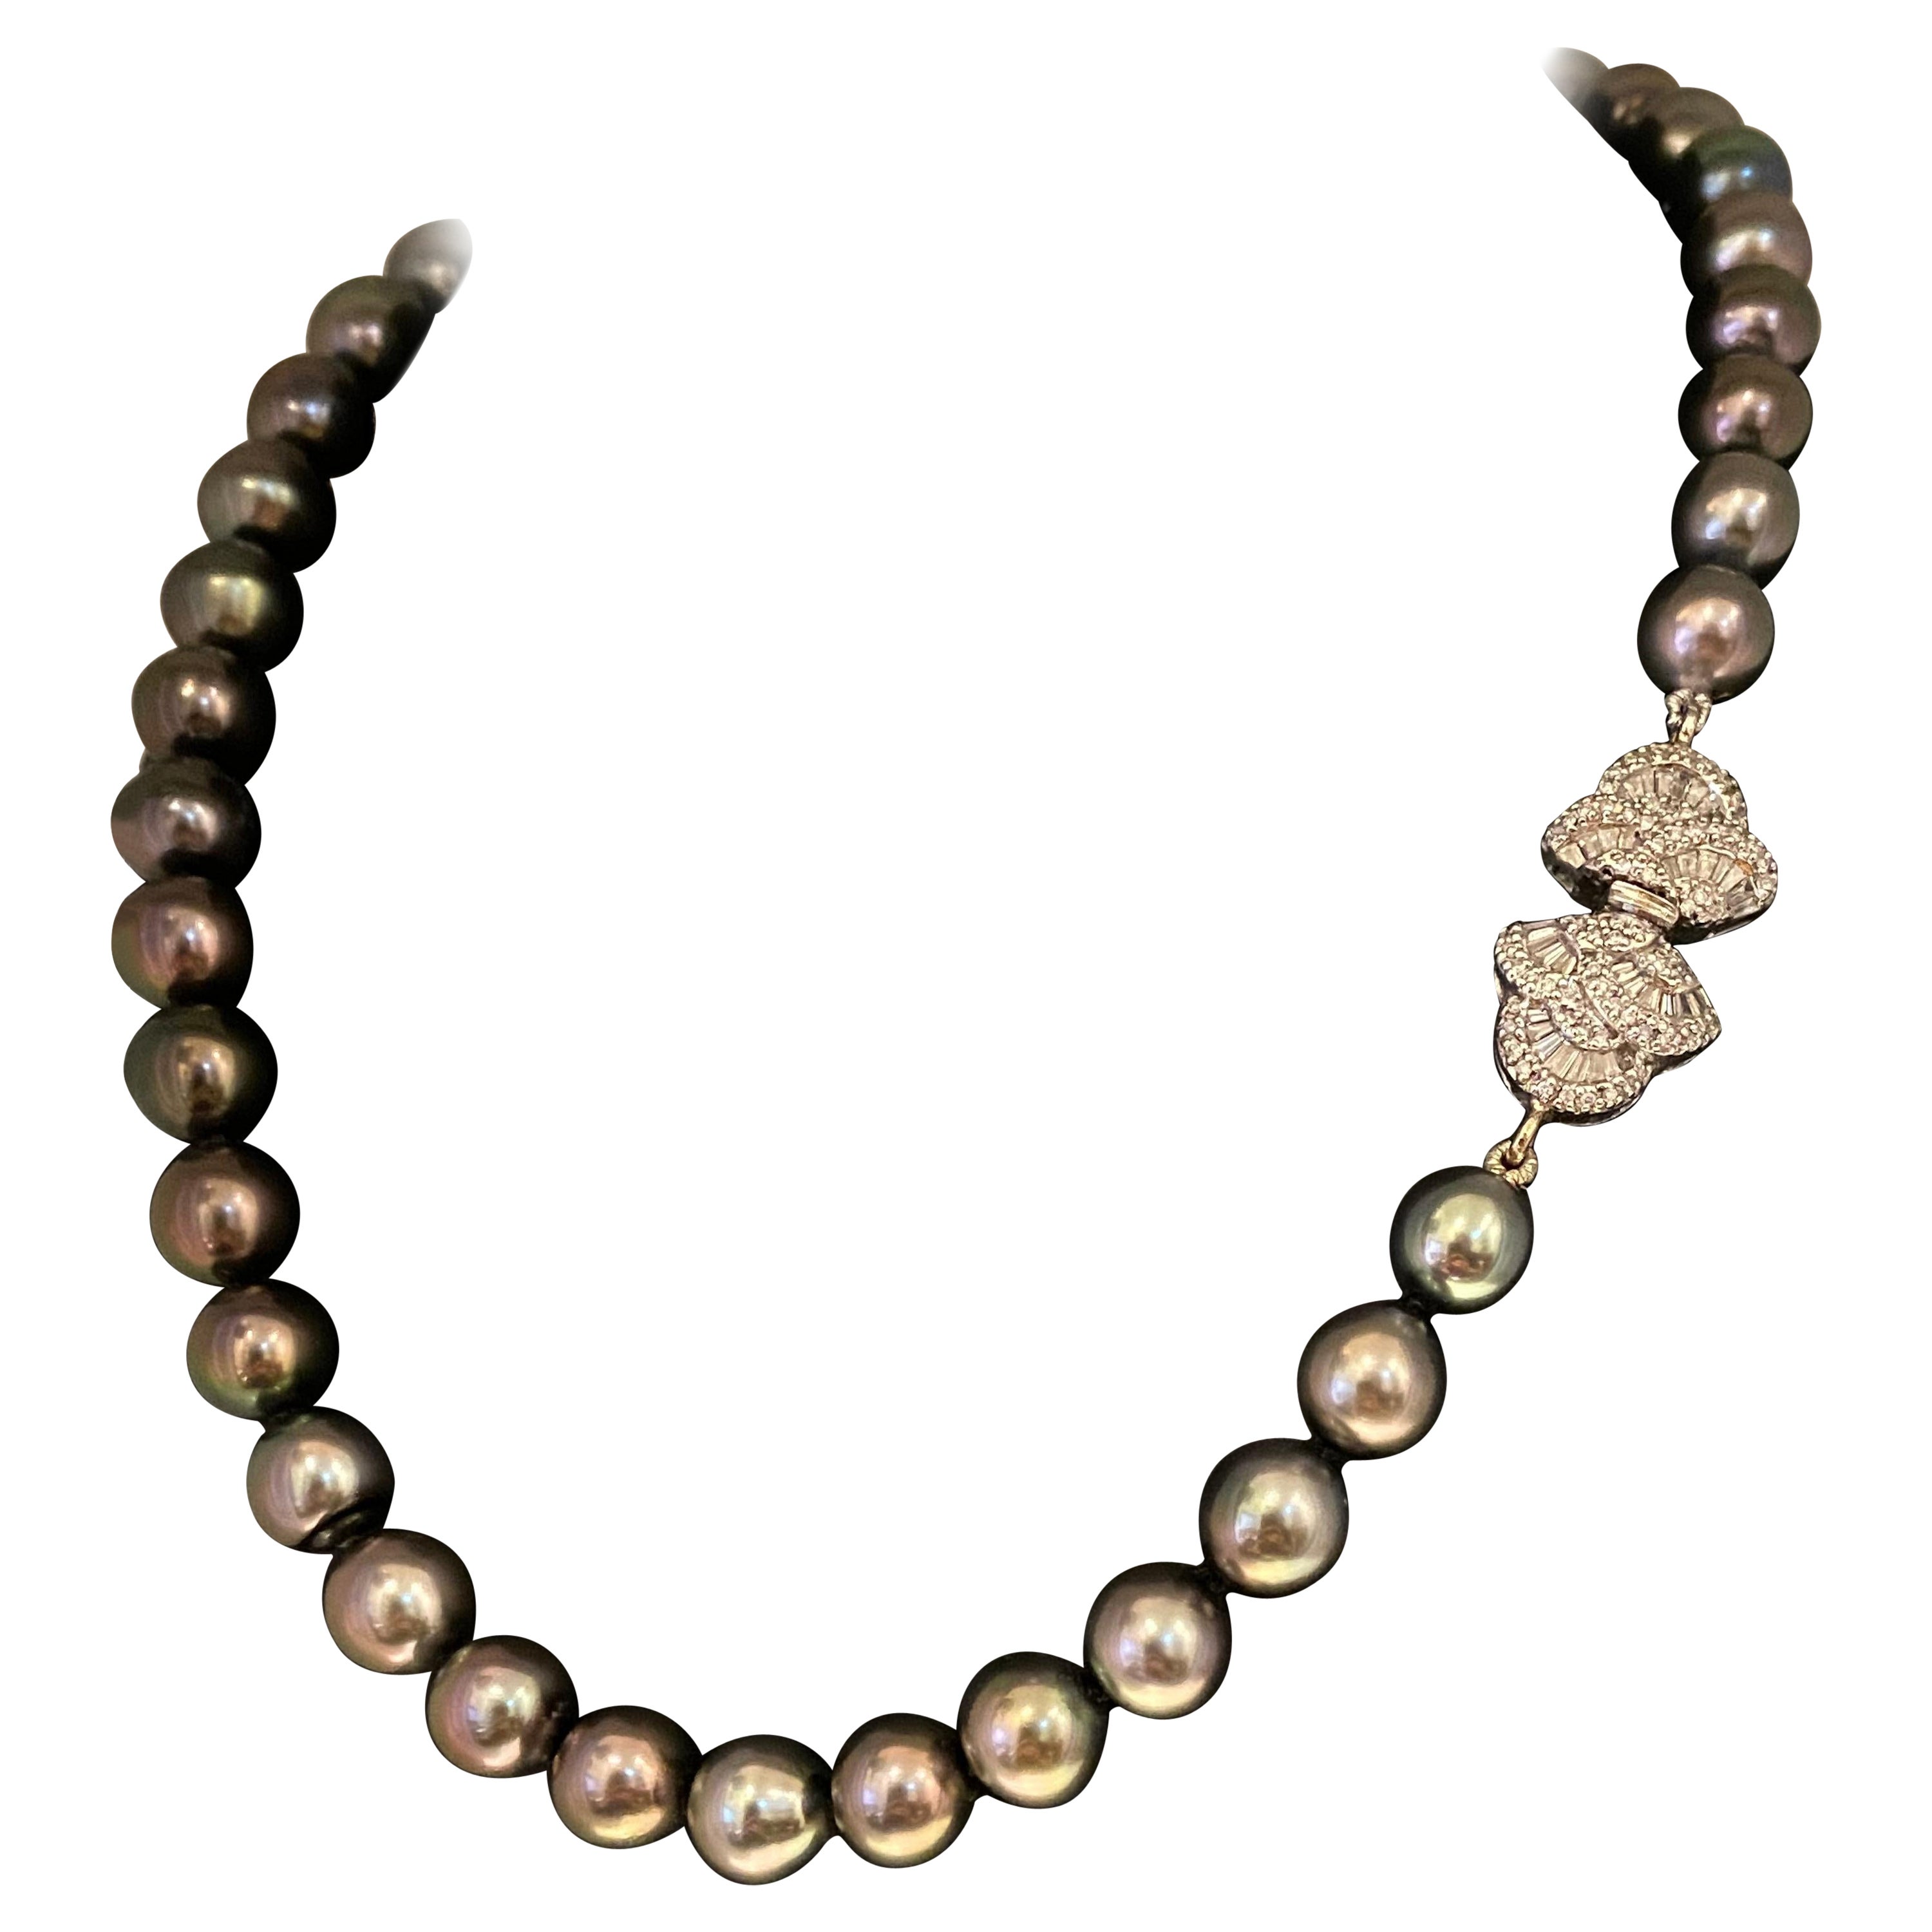 Tahitian Royal Peacock 9-11mm Pearl Necklace with 18K Gold 1.25ct Diamond Clasp For Sale